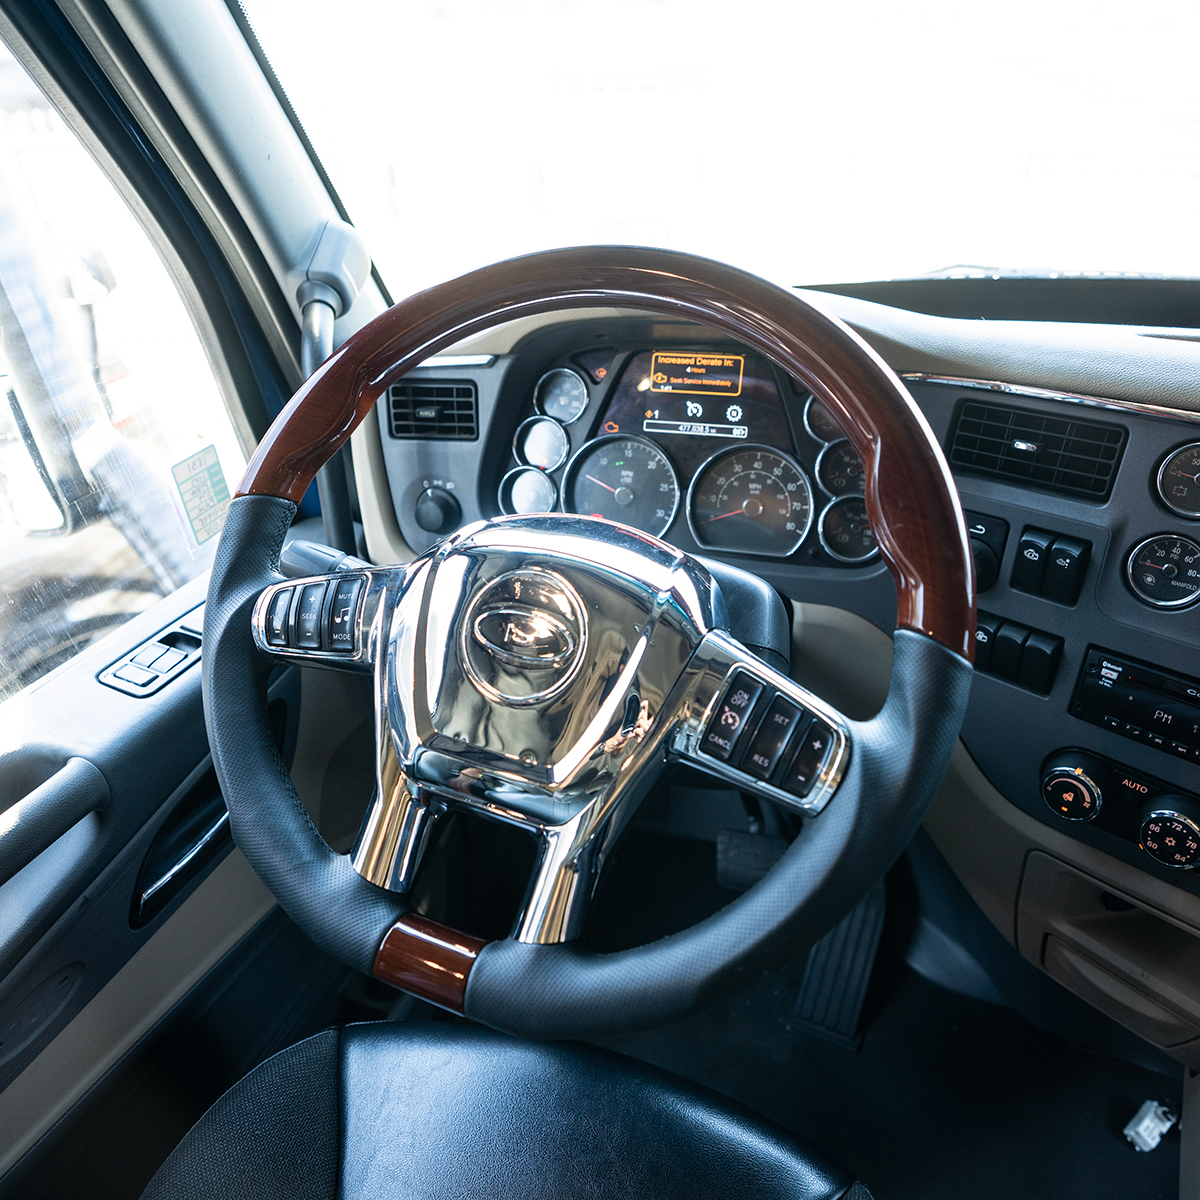 United Pacific Industries Releases New "YourGrip™" Steering Wheel System